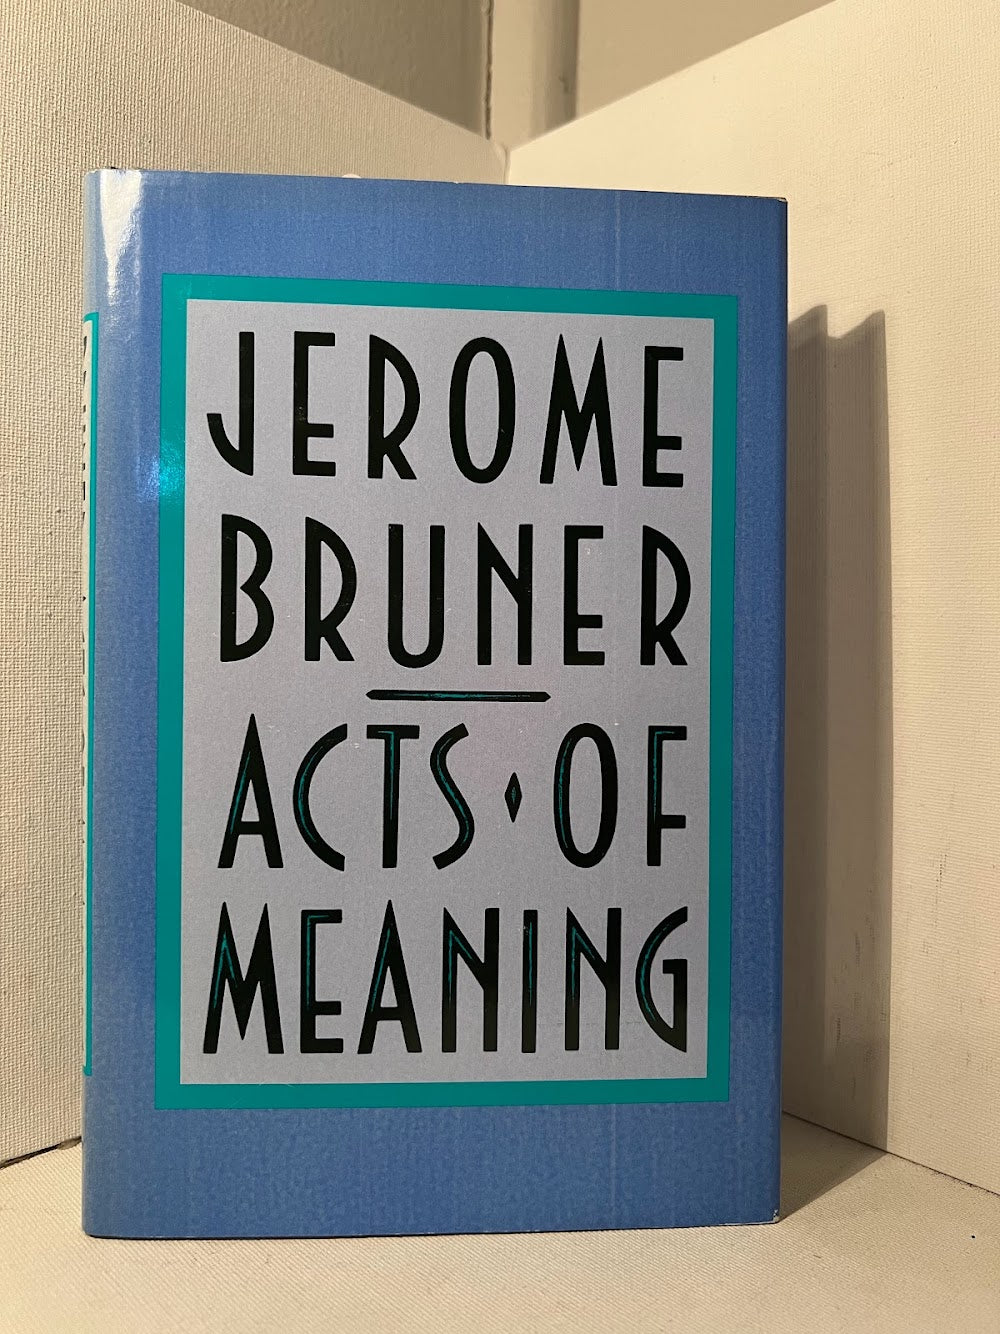 Acts of Meaning by Jerome Bruner